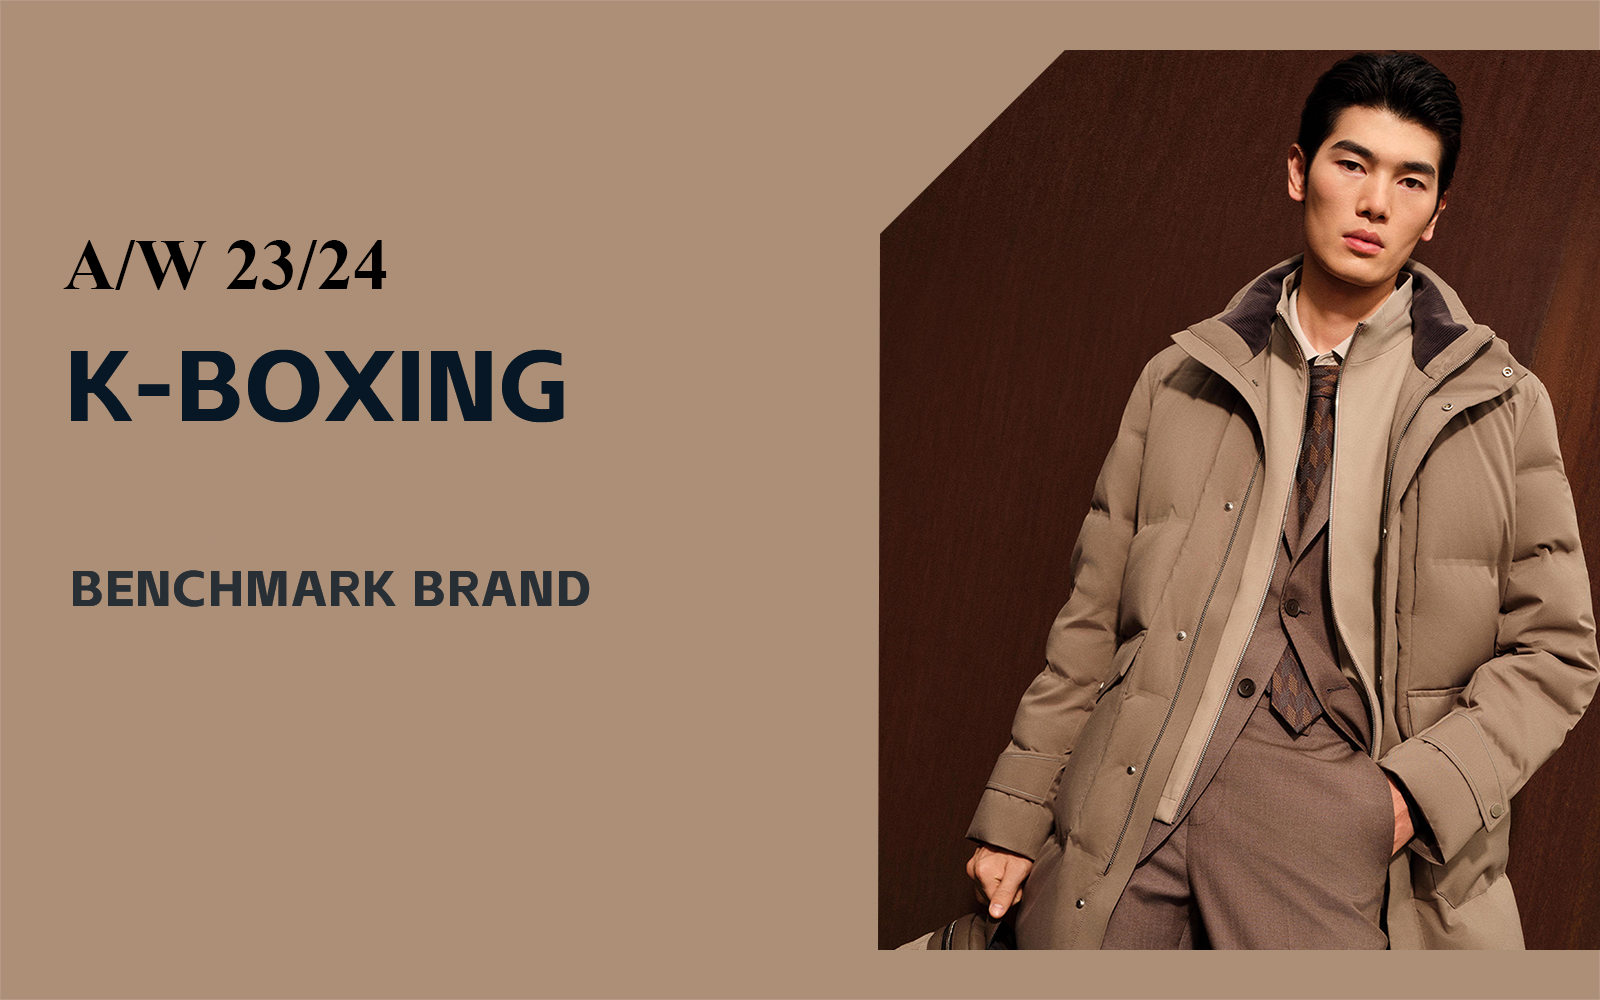 The Analysis of K-BOXING The Benchmark Menswear Brand